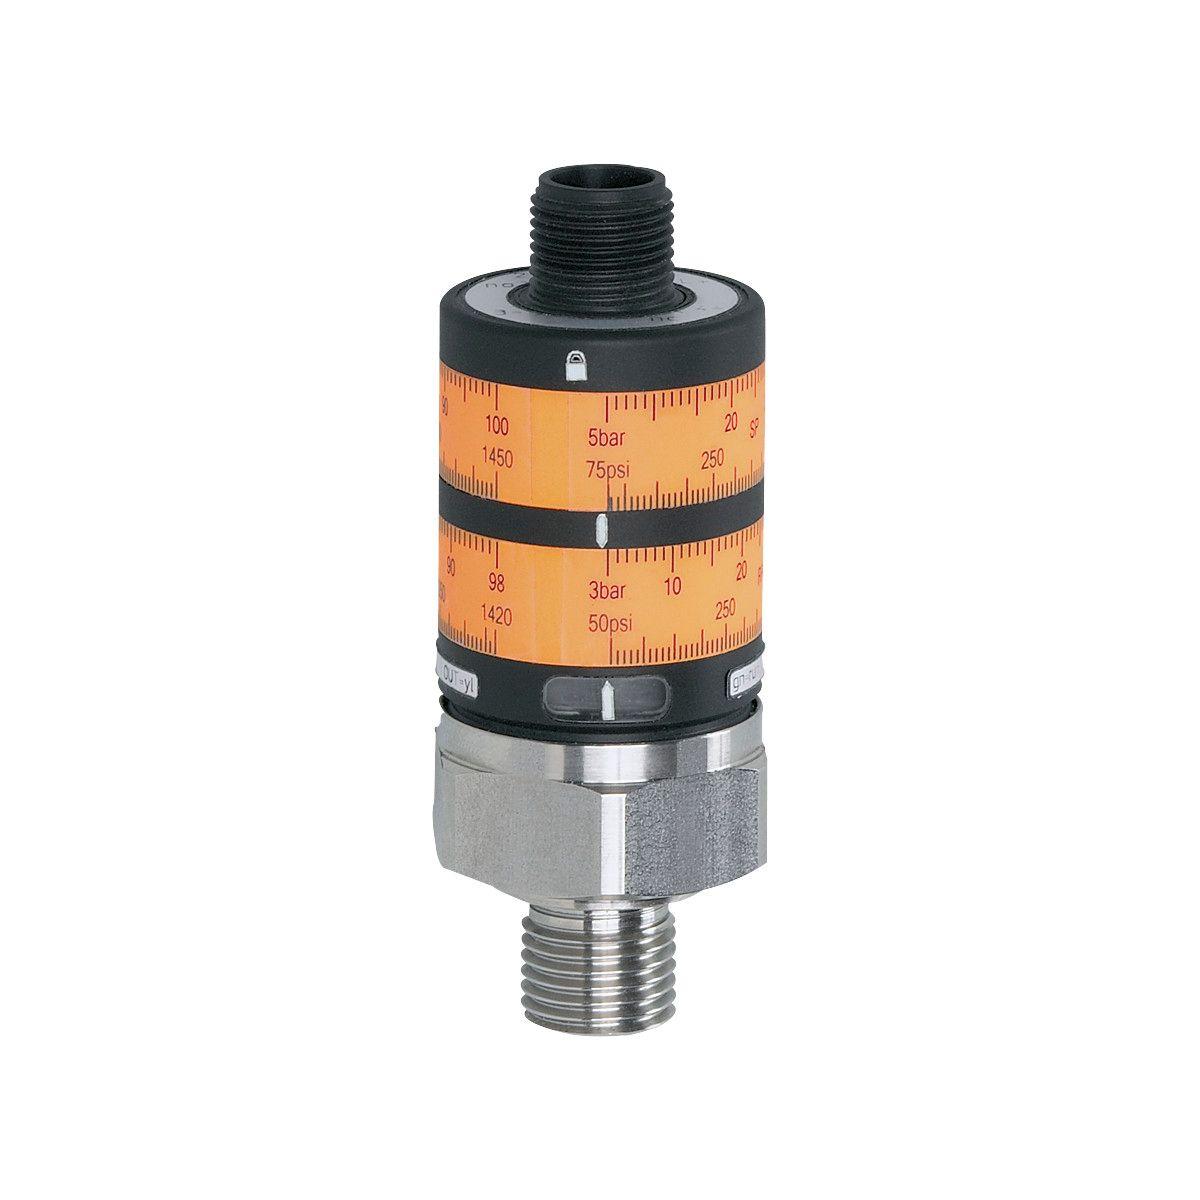 ifm Electronic PK6524 Pressure switch with intuitive switch point setting, Simple switch point setting by means of two setting rings allowing optimum reading, Output signal: switching signal, Measuring range: 0...10 bar 0...145 psi, Process connection: threaded connection G 1/